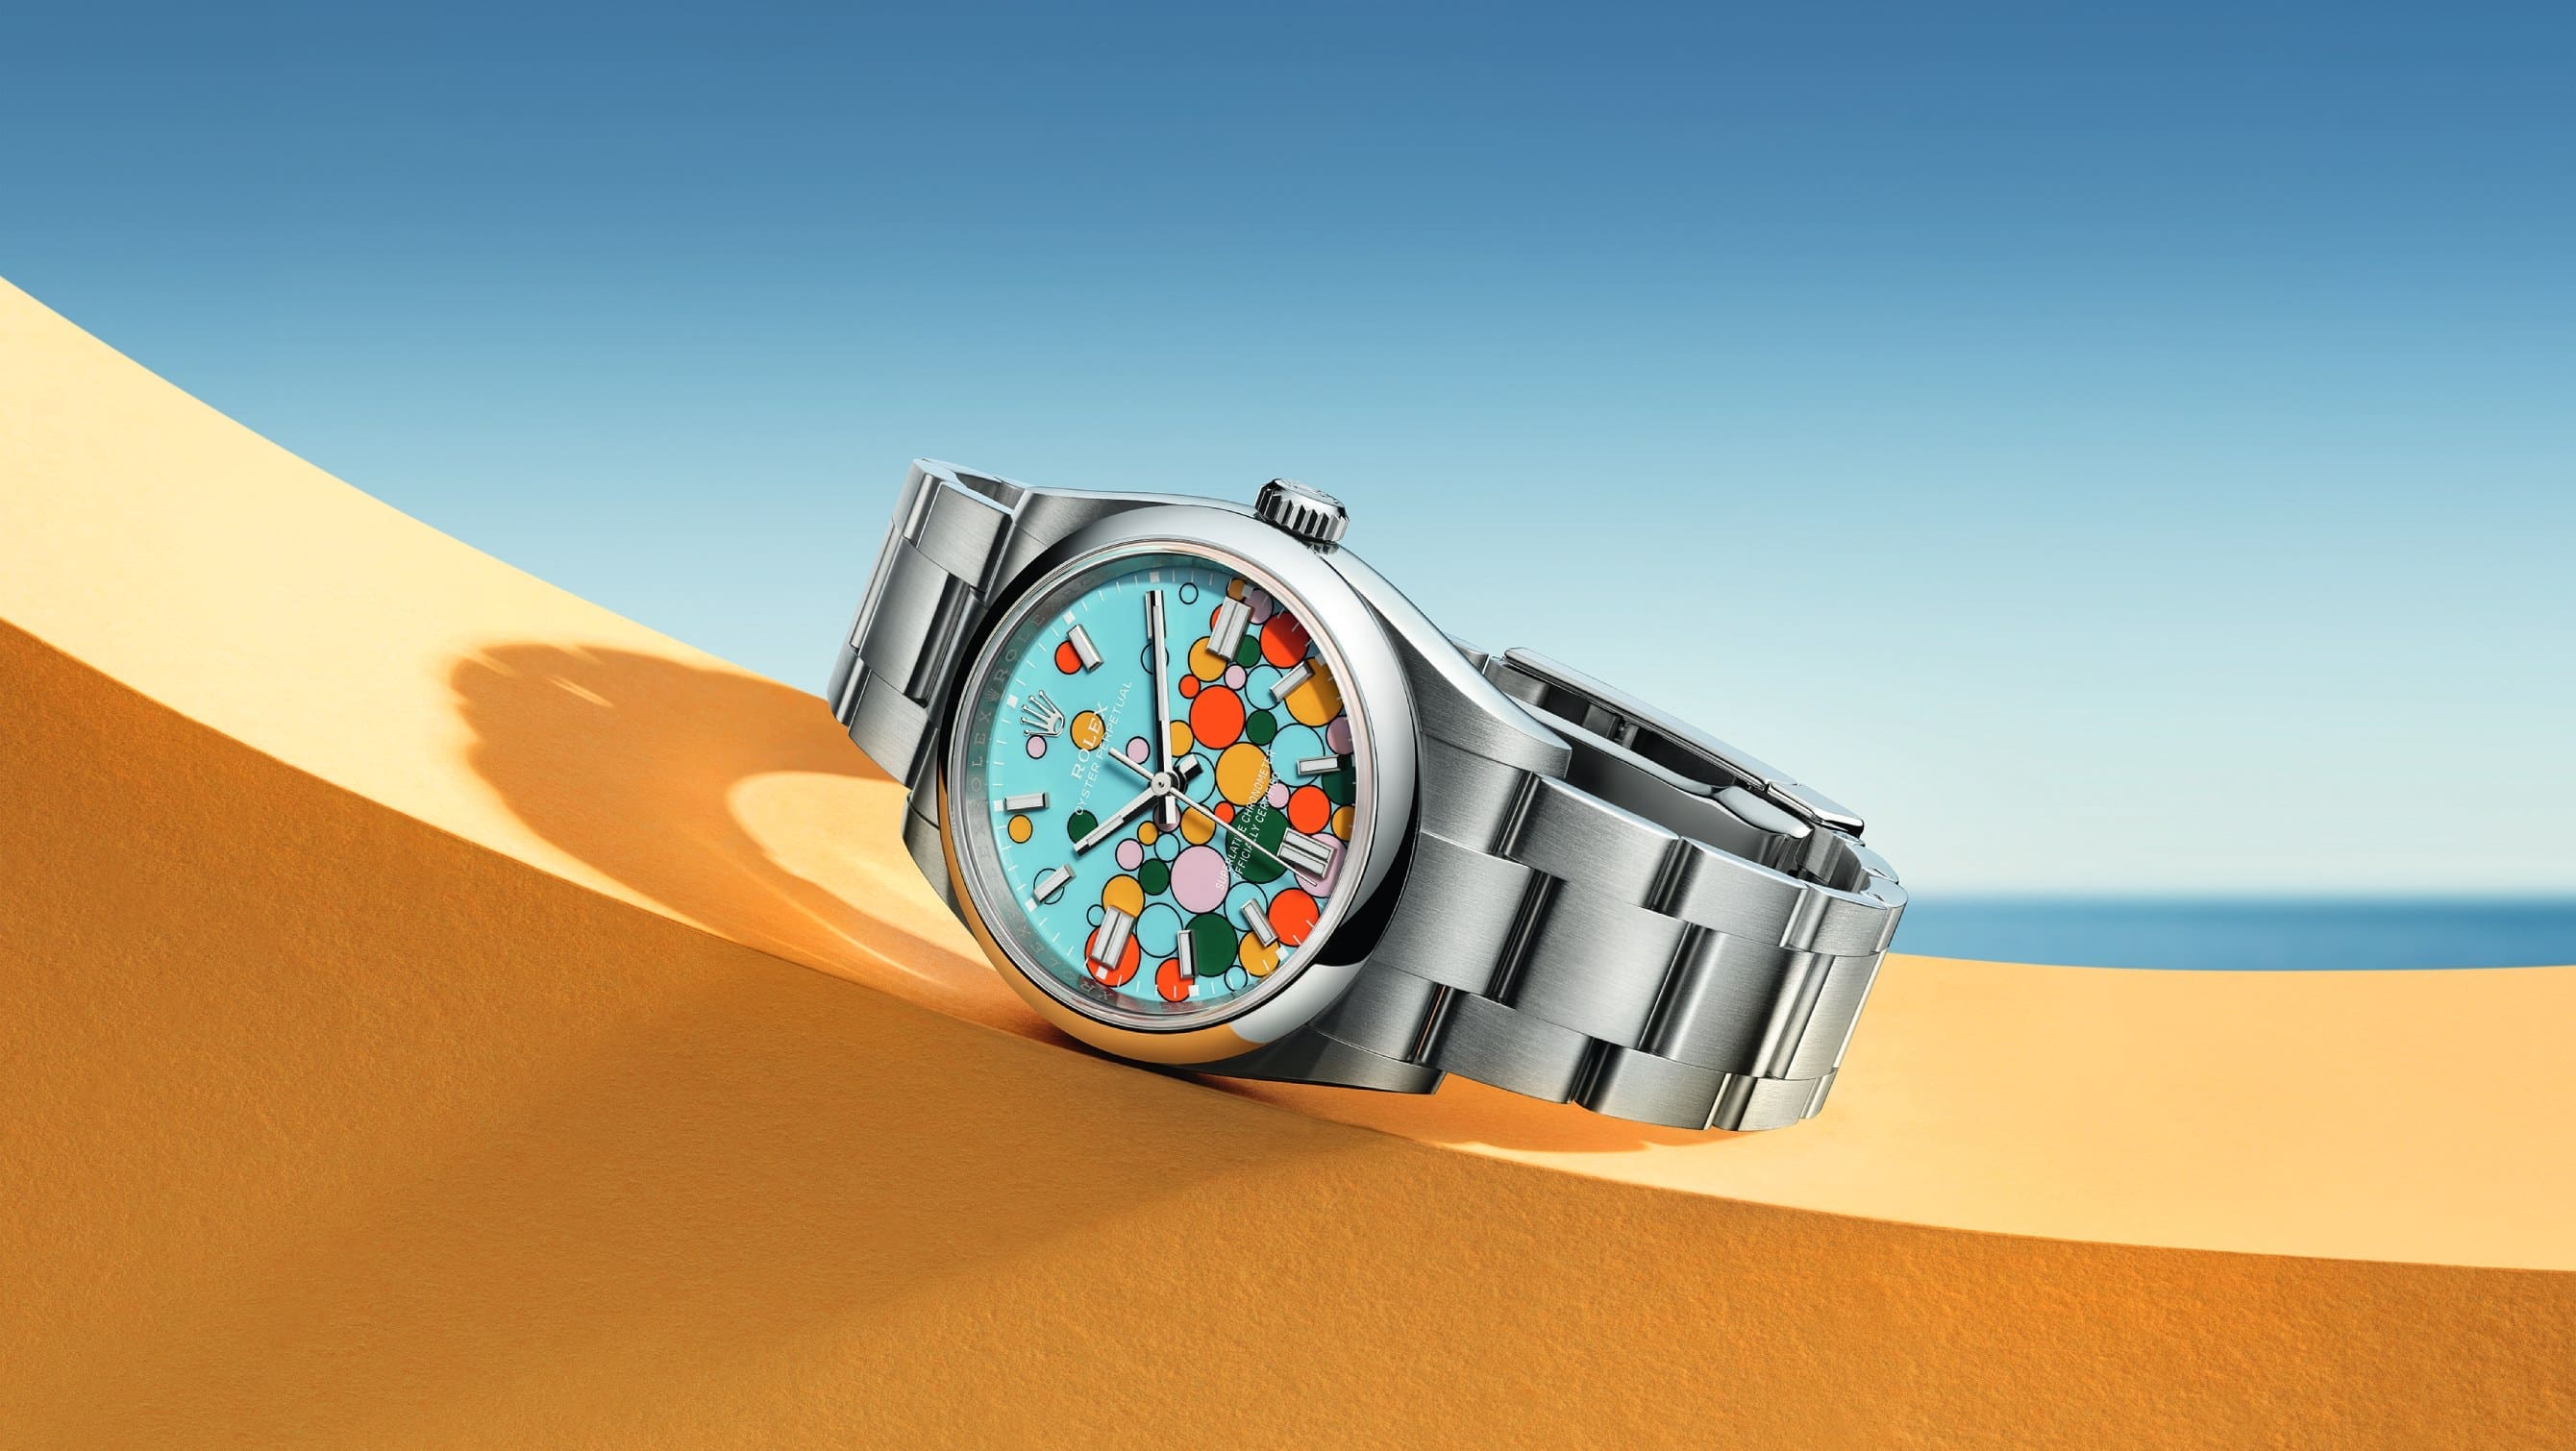 The Rolex Oyster Perpetual Celebration has a bubbly personality